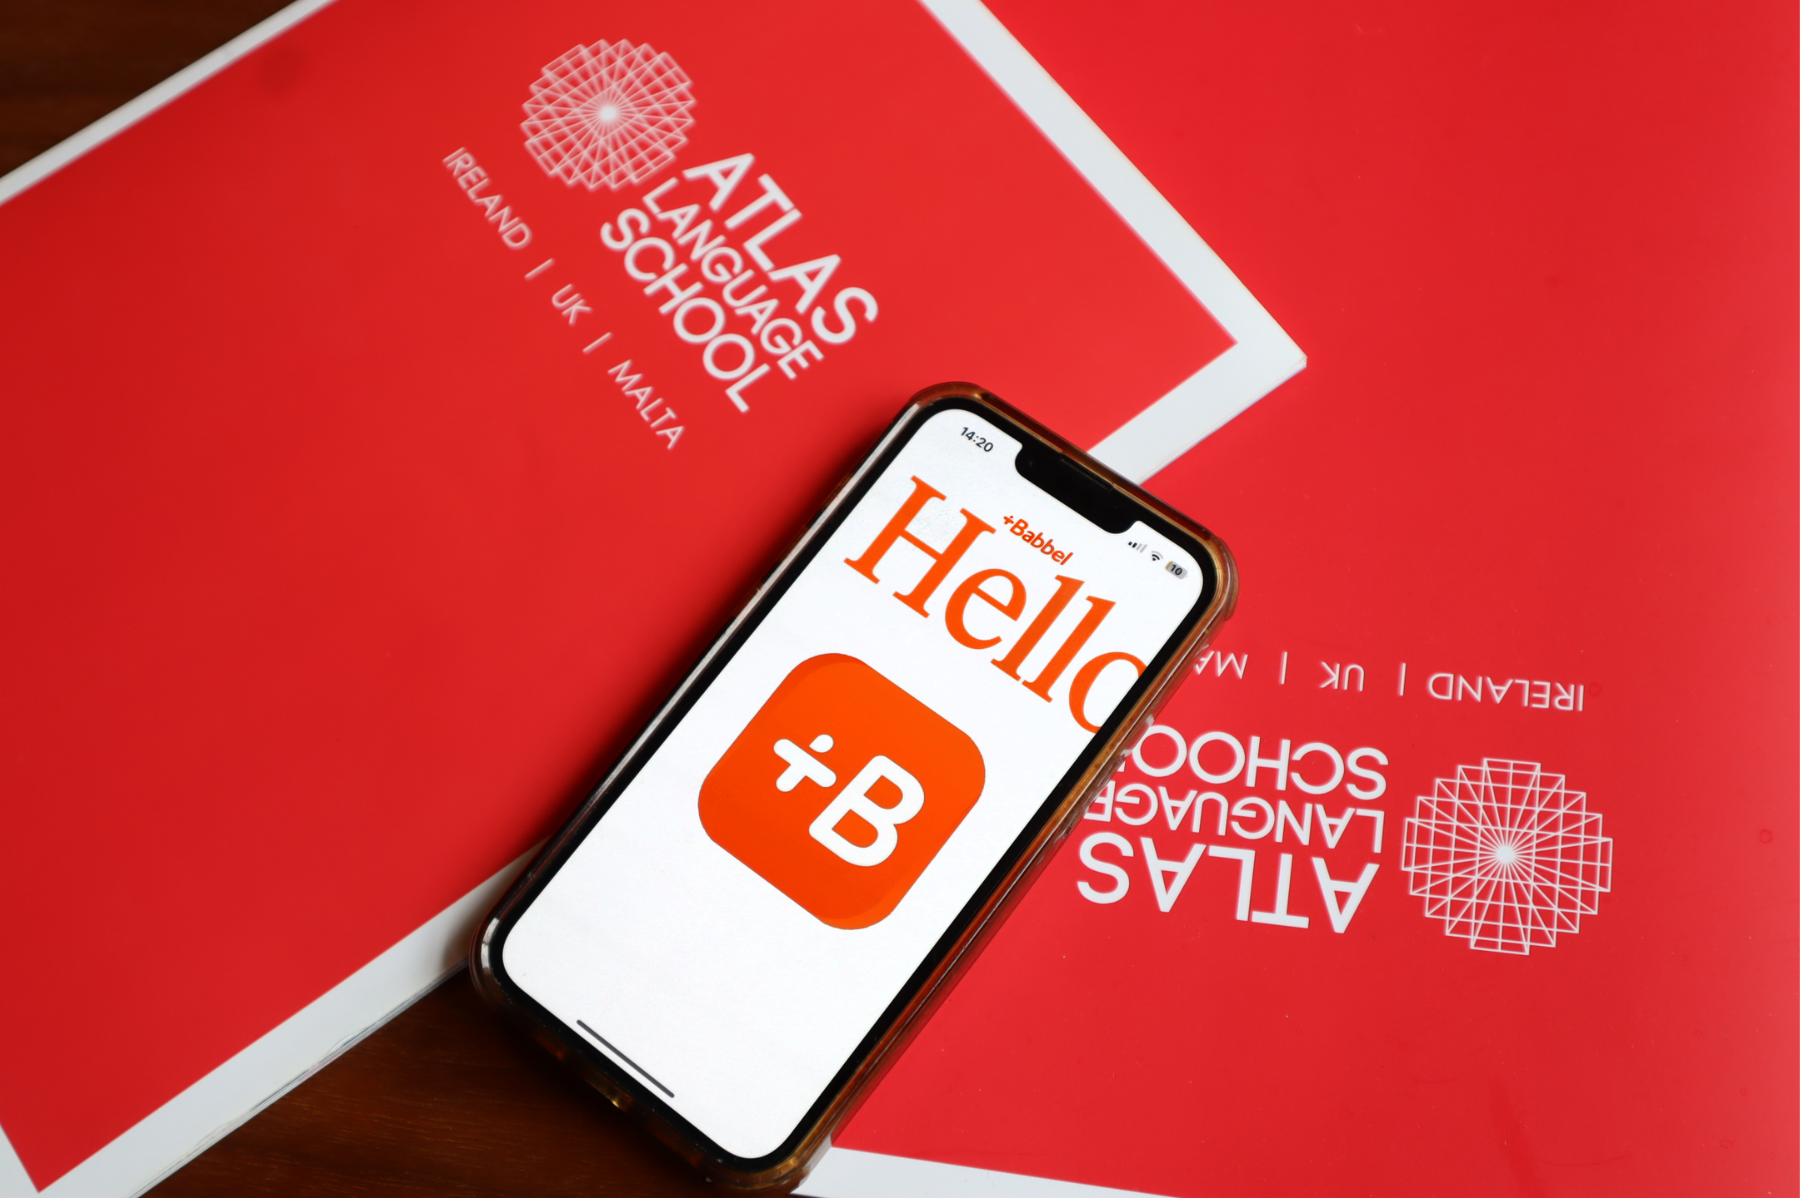 Atlas school magazine with the Babbel learning App used both to improve English.